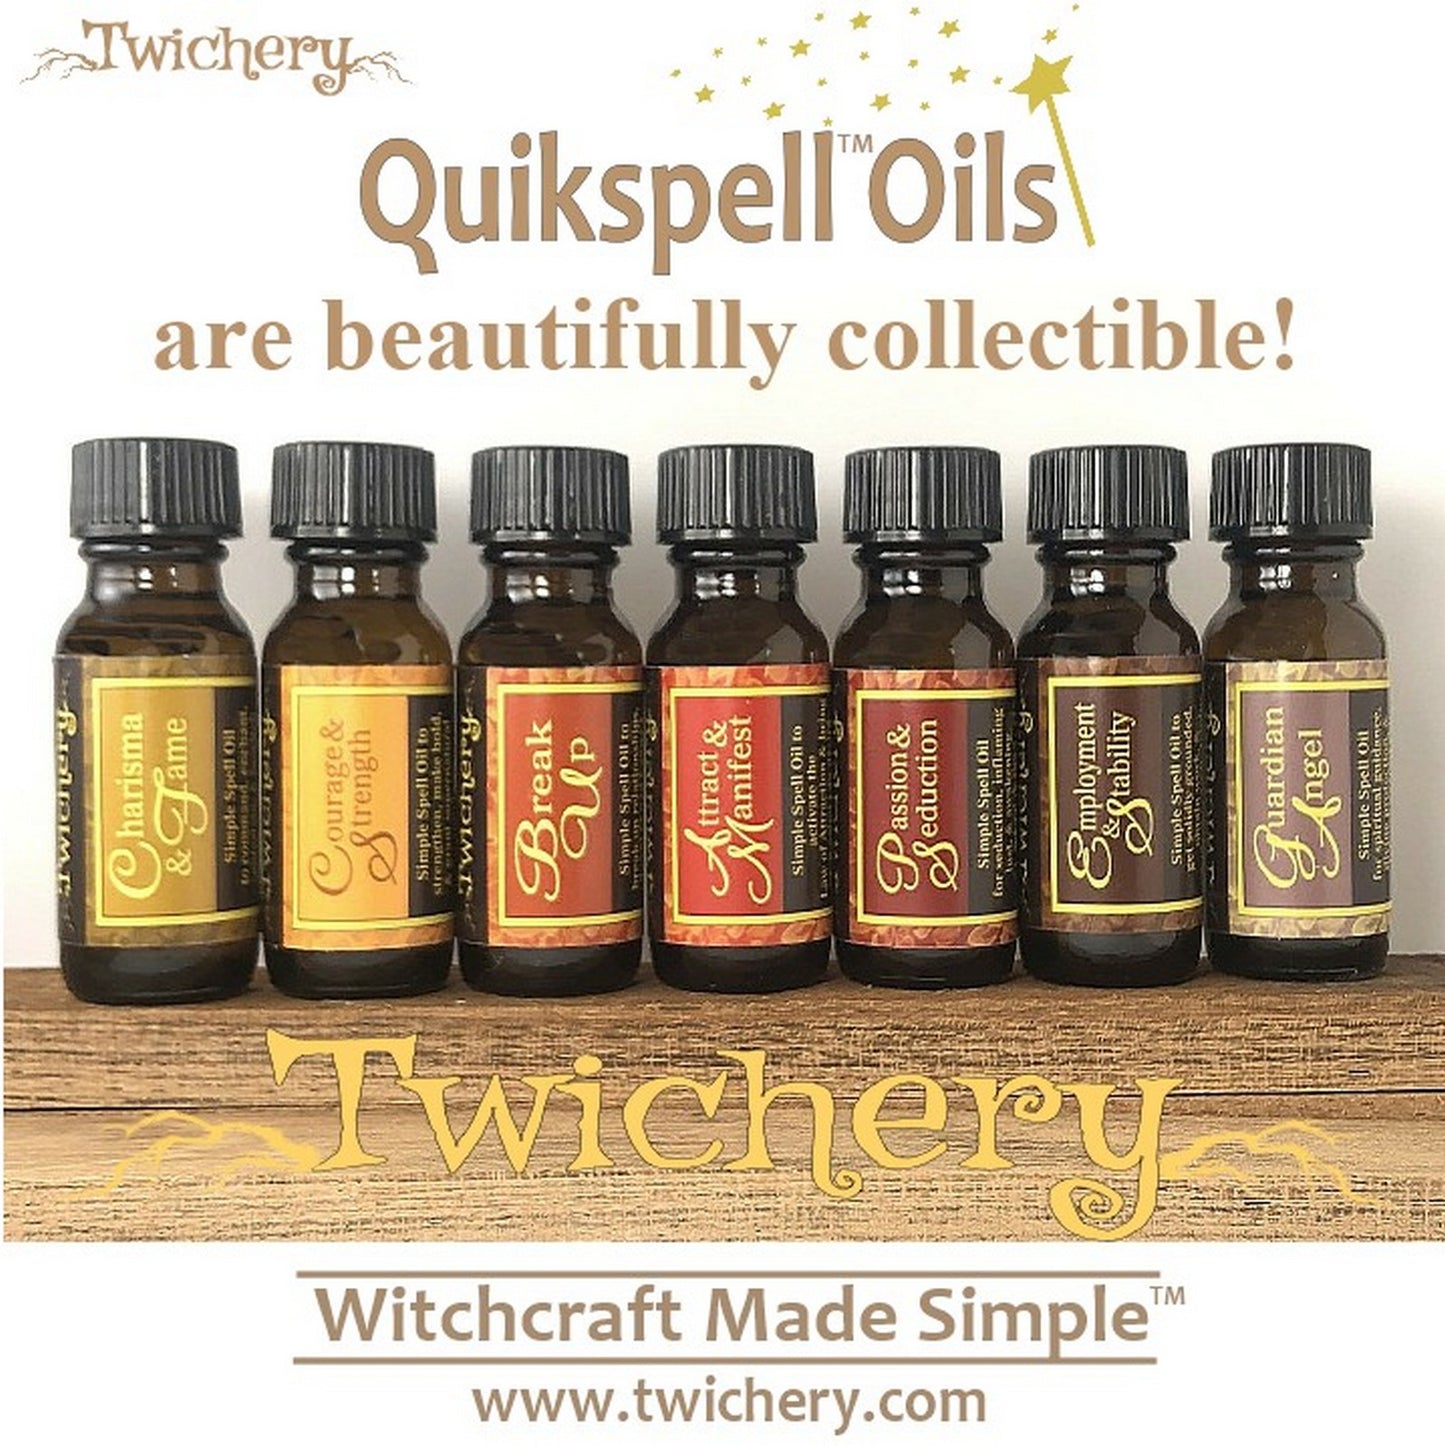 Collect all 24 Twichery Quikspell Oils, including your Cursing & Chaos Quikspell Oil for making people stop when it's time for them to stop. Witchcraft Made Simple. Hoodoo voodoo, wicca, pagan